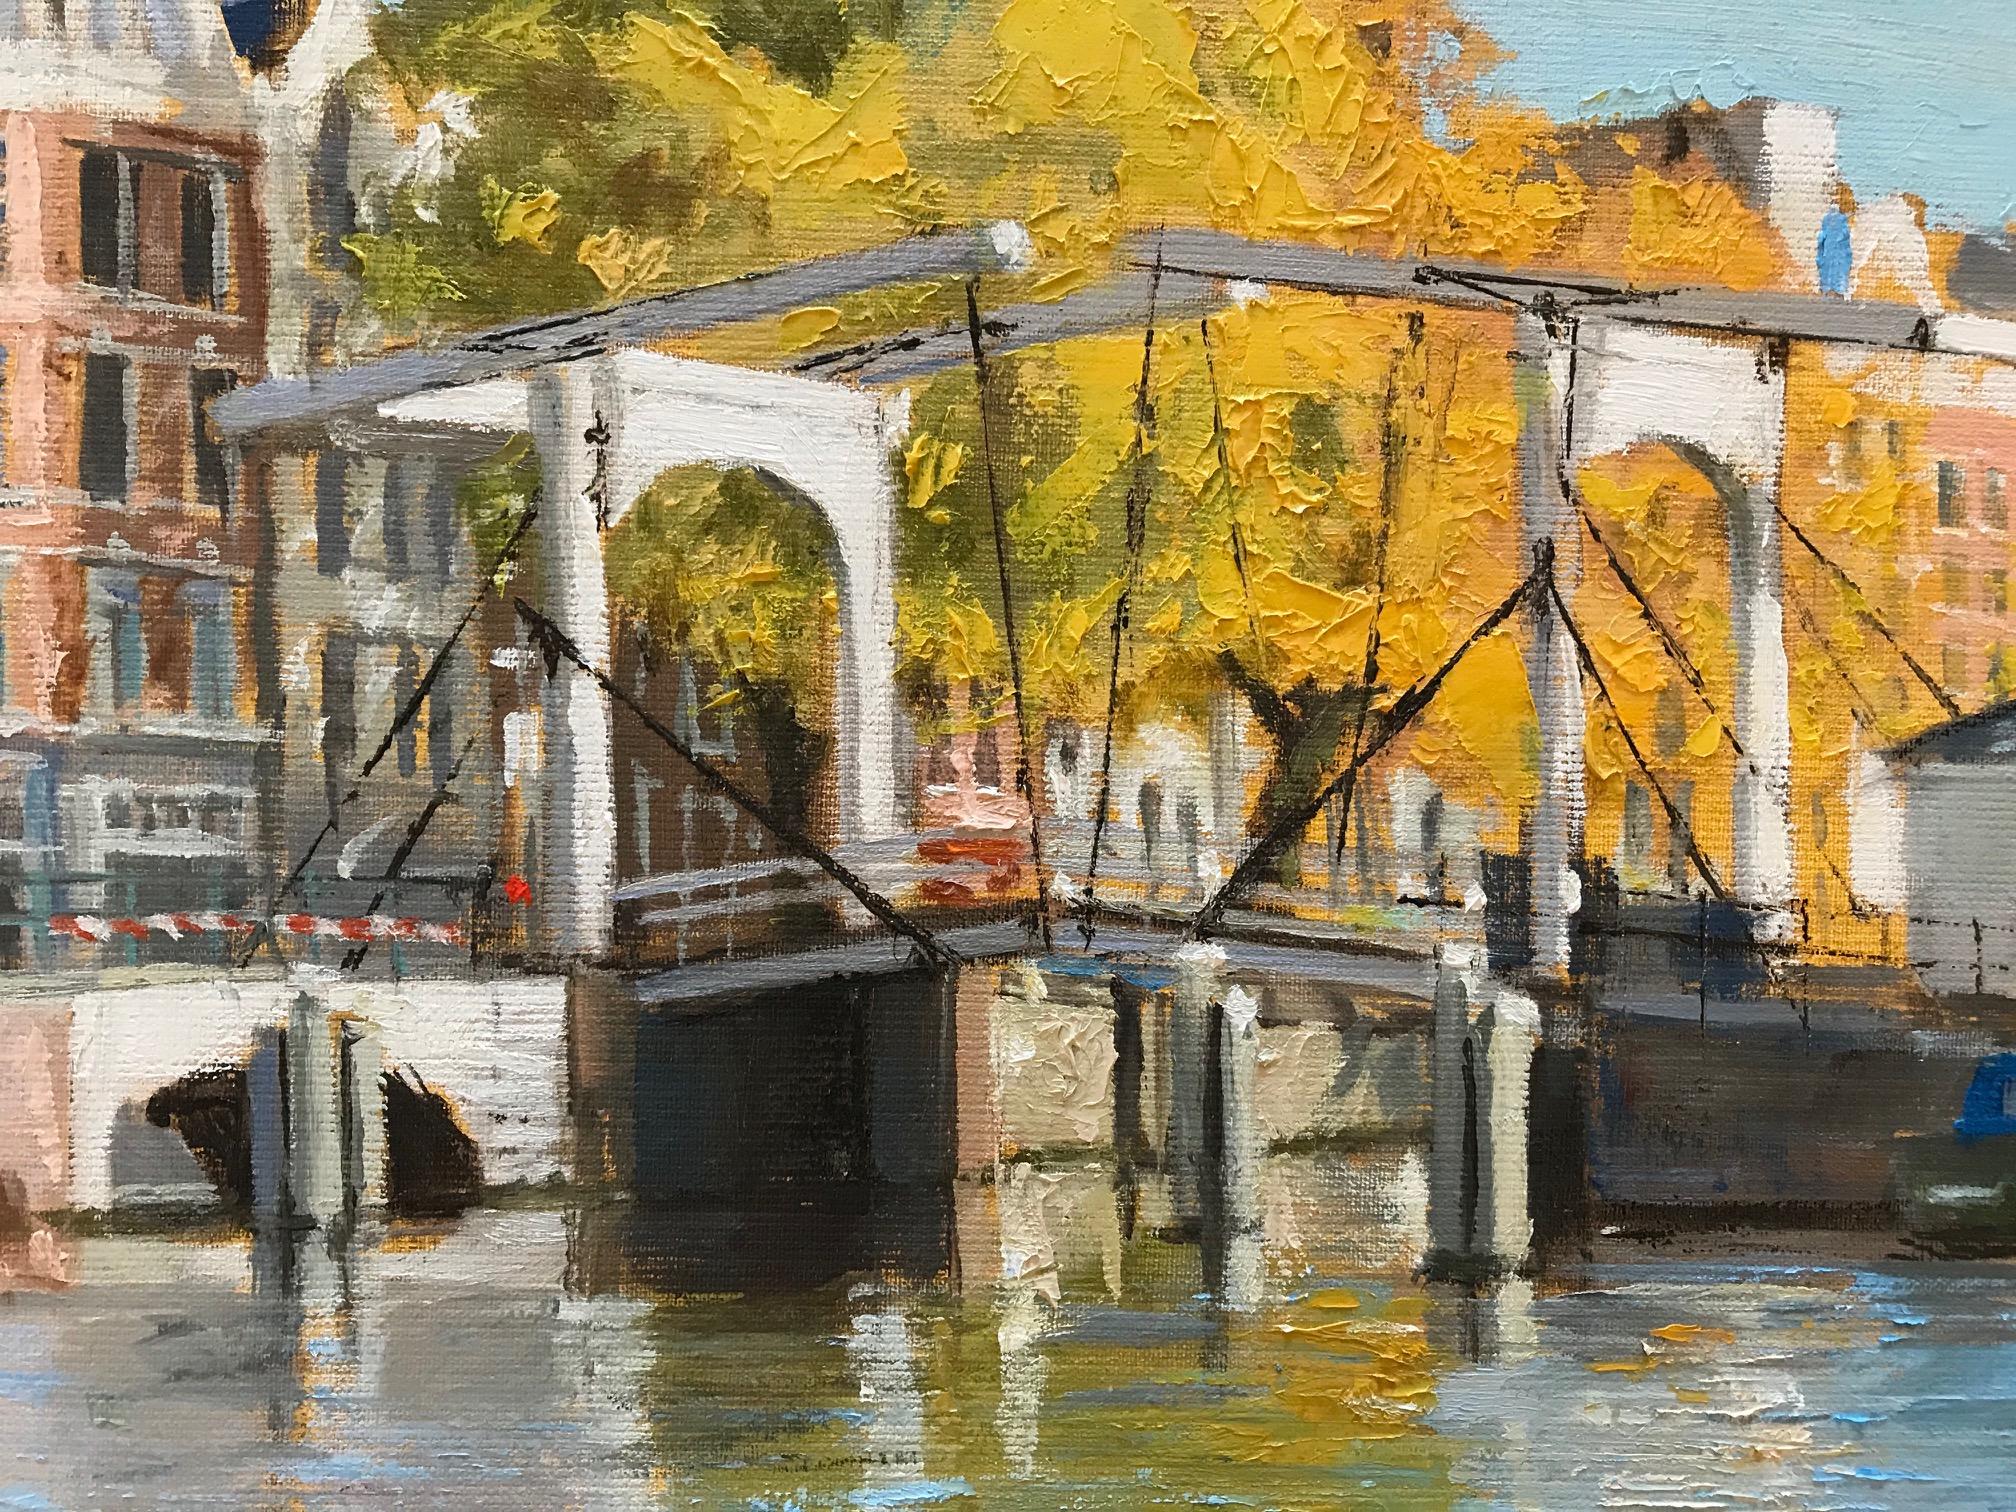 ''Bridges, Boats and Trees'' Contemporary Impressionistic Painting of Amsterdam - Brown Figurative Painting by Richard van Mensvoort